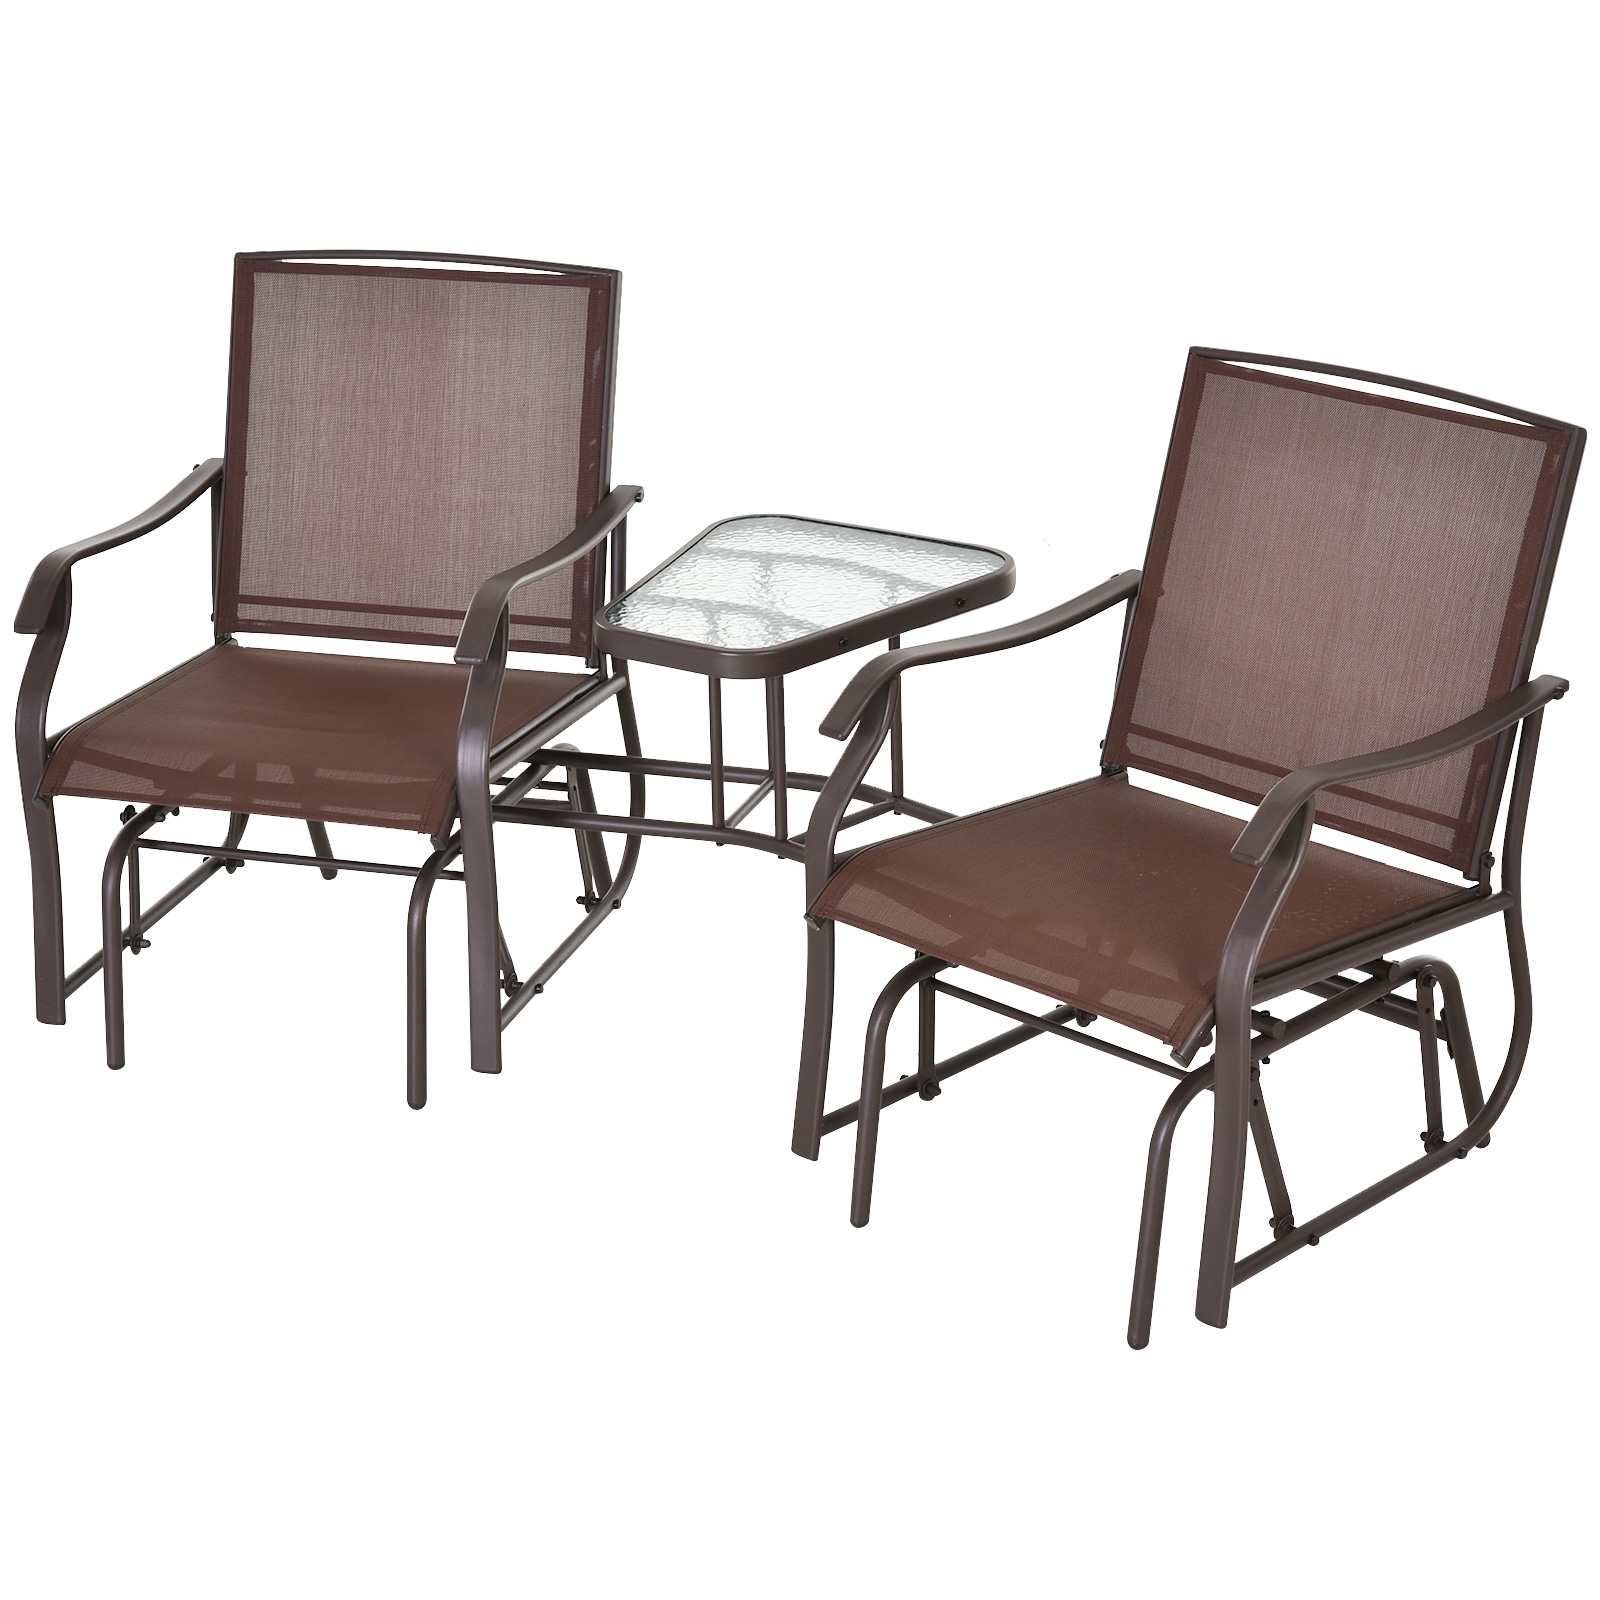 Outsunny 3-pc. Outdoor Sling Fabric Gliding Rocker Chairs W/ Table